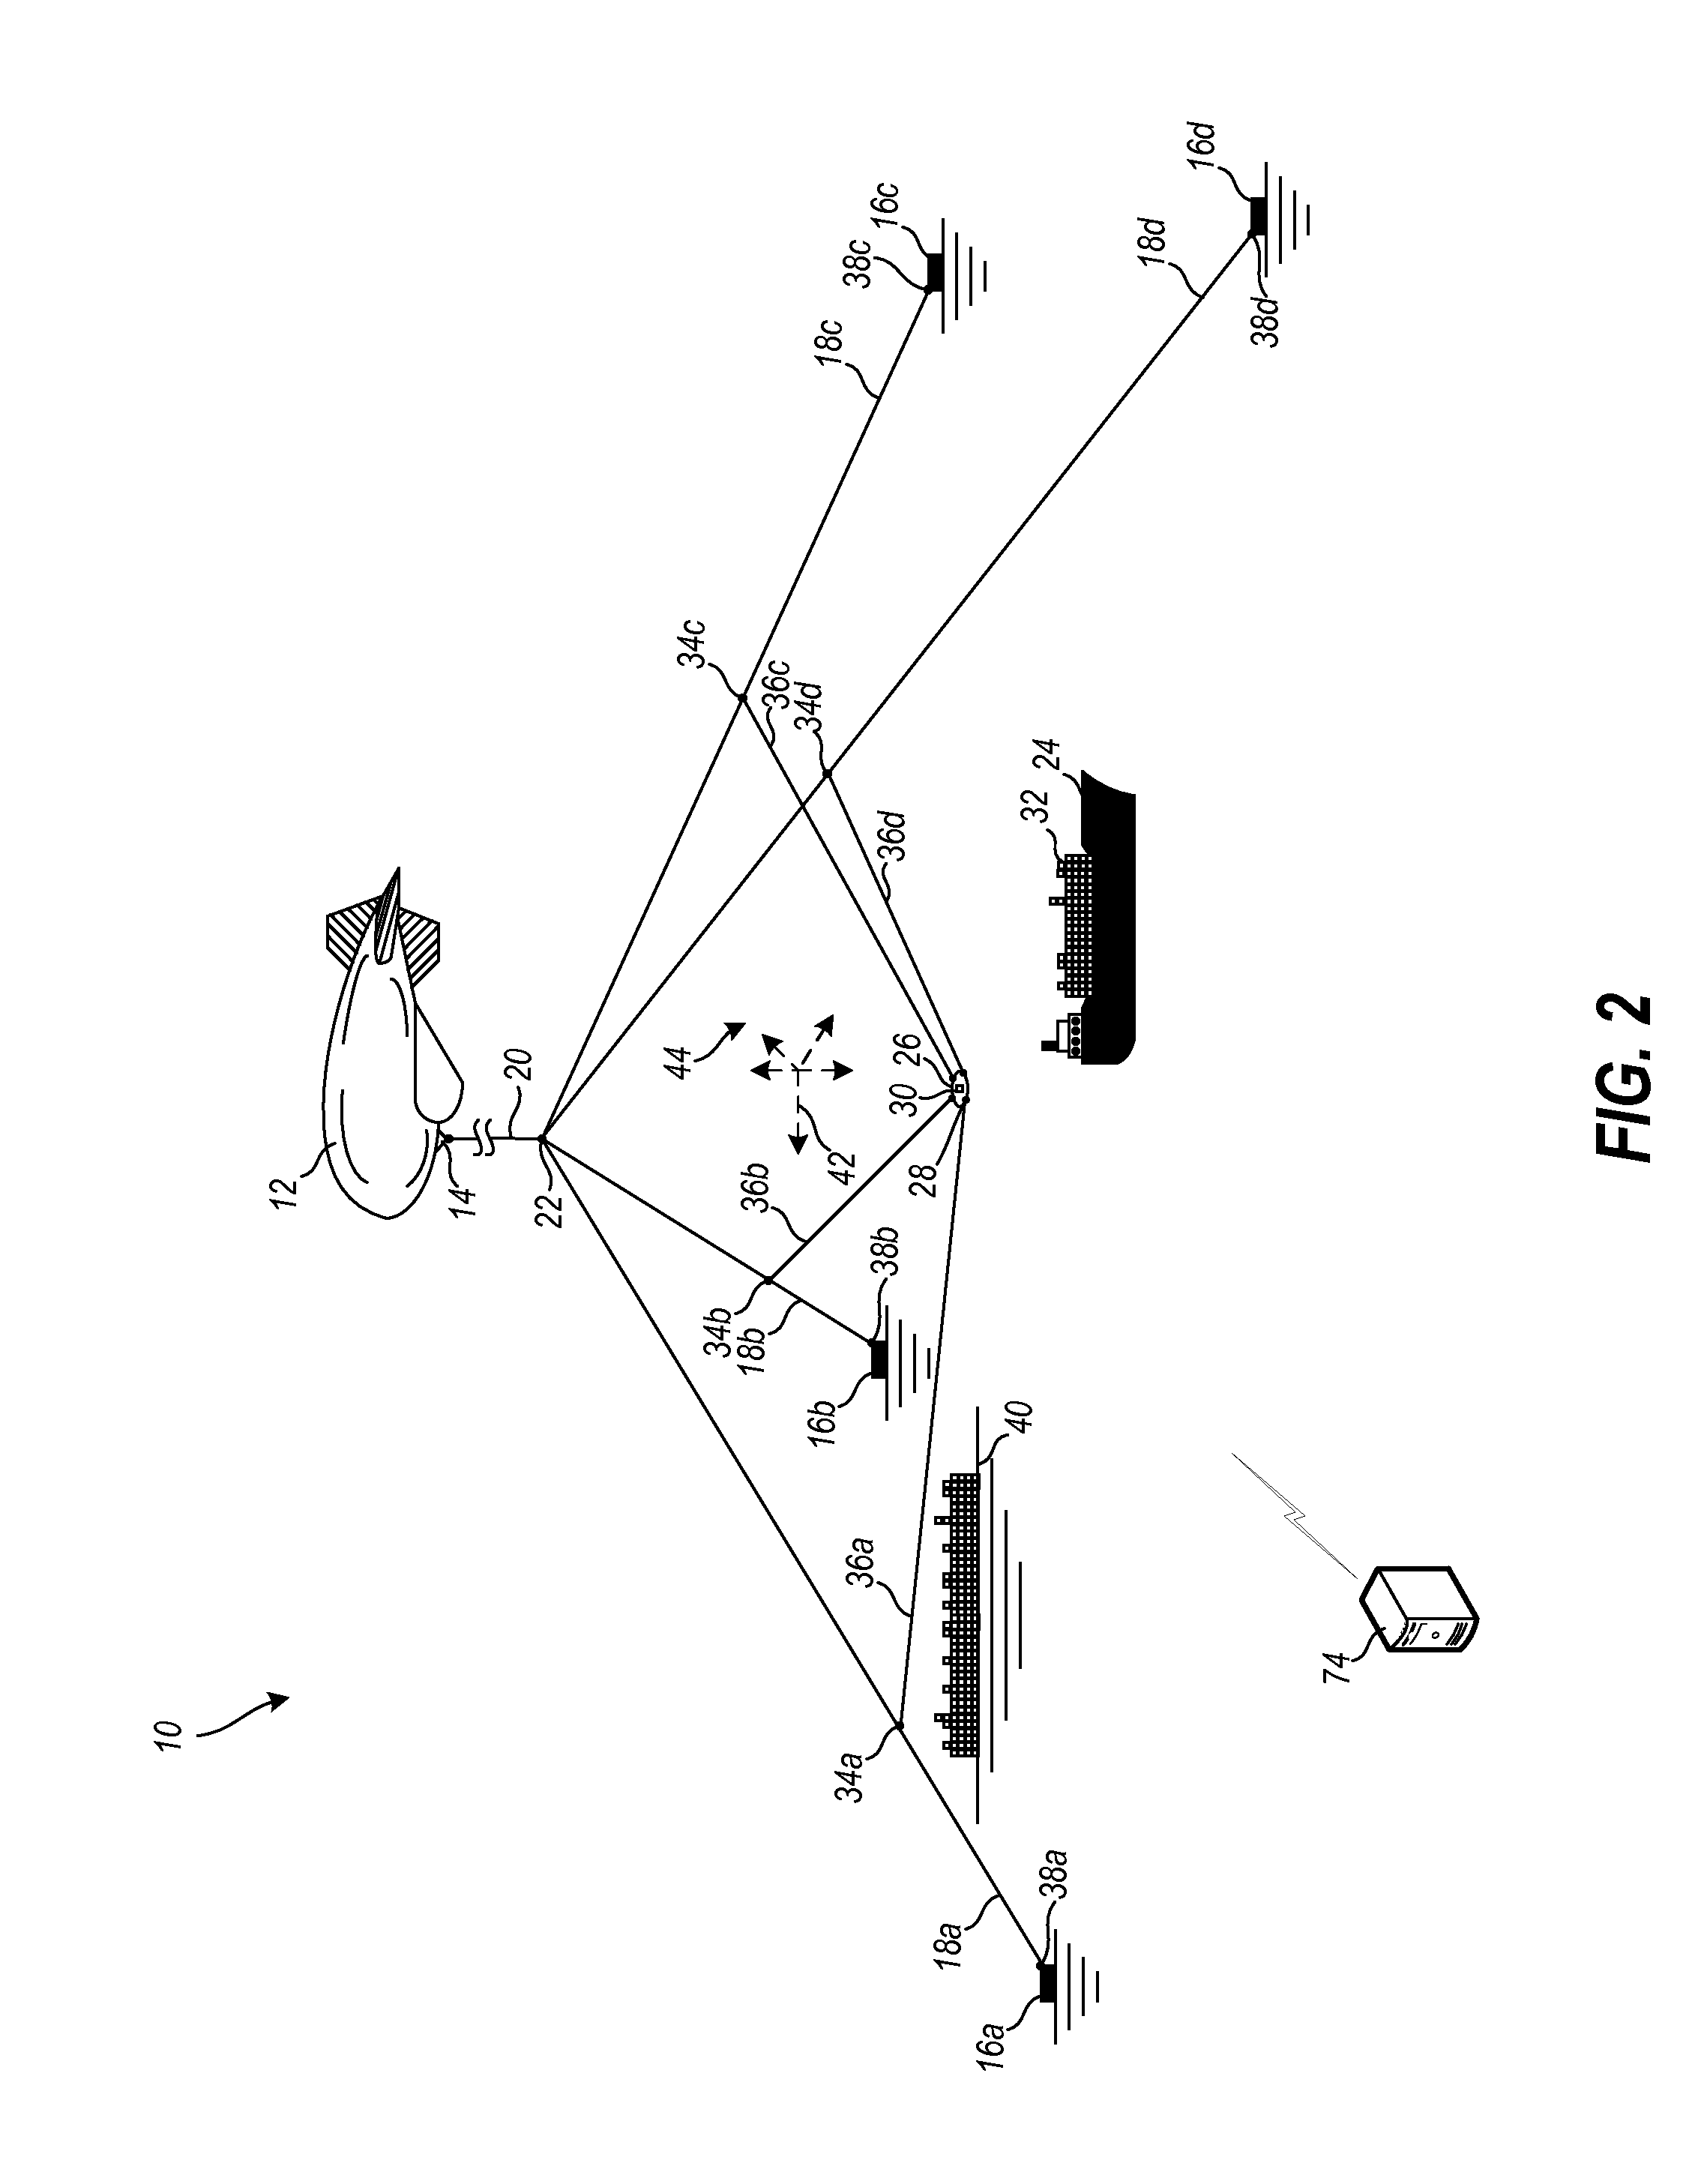 Systems and methods for aerial cabled transportation